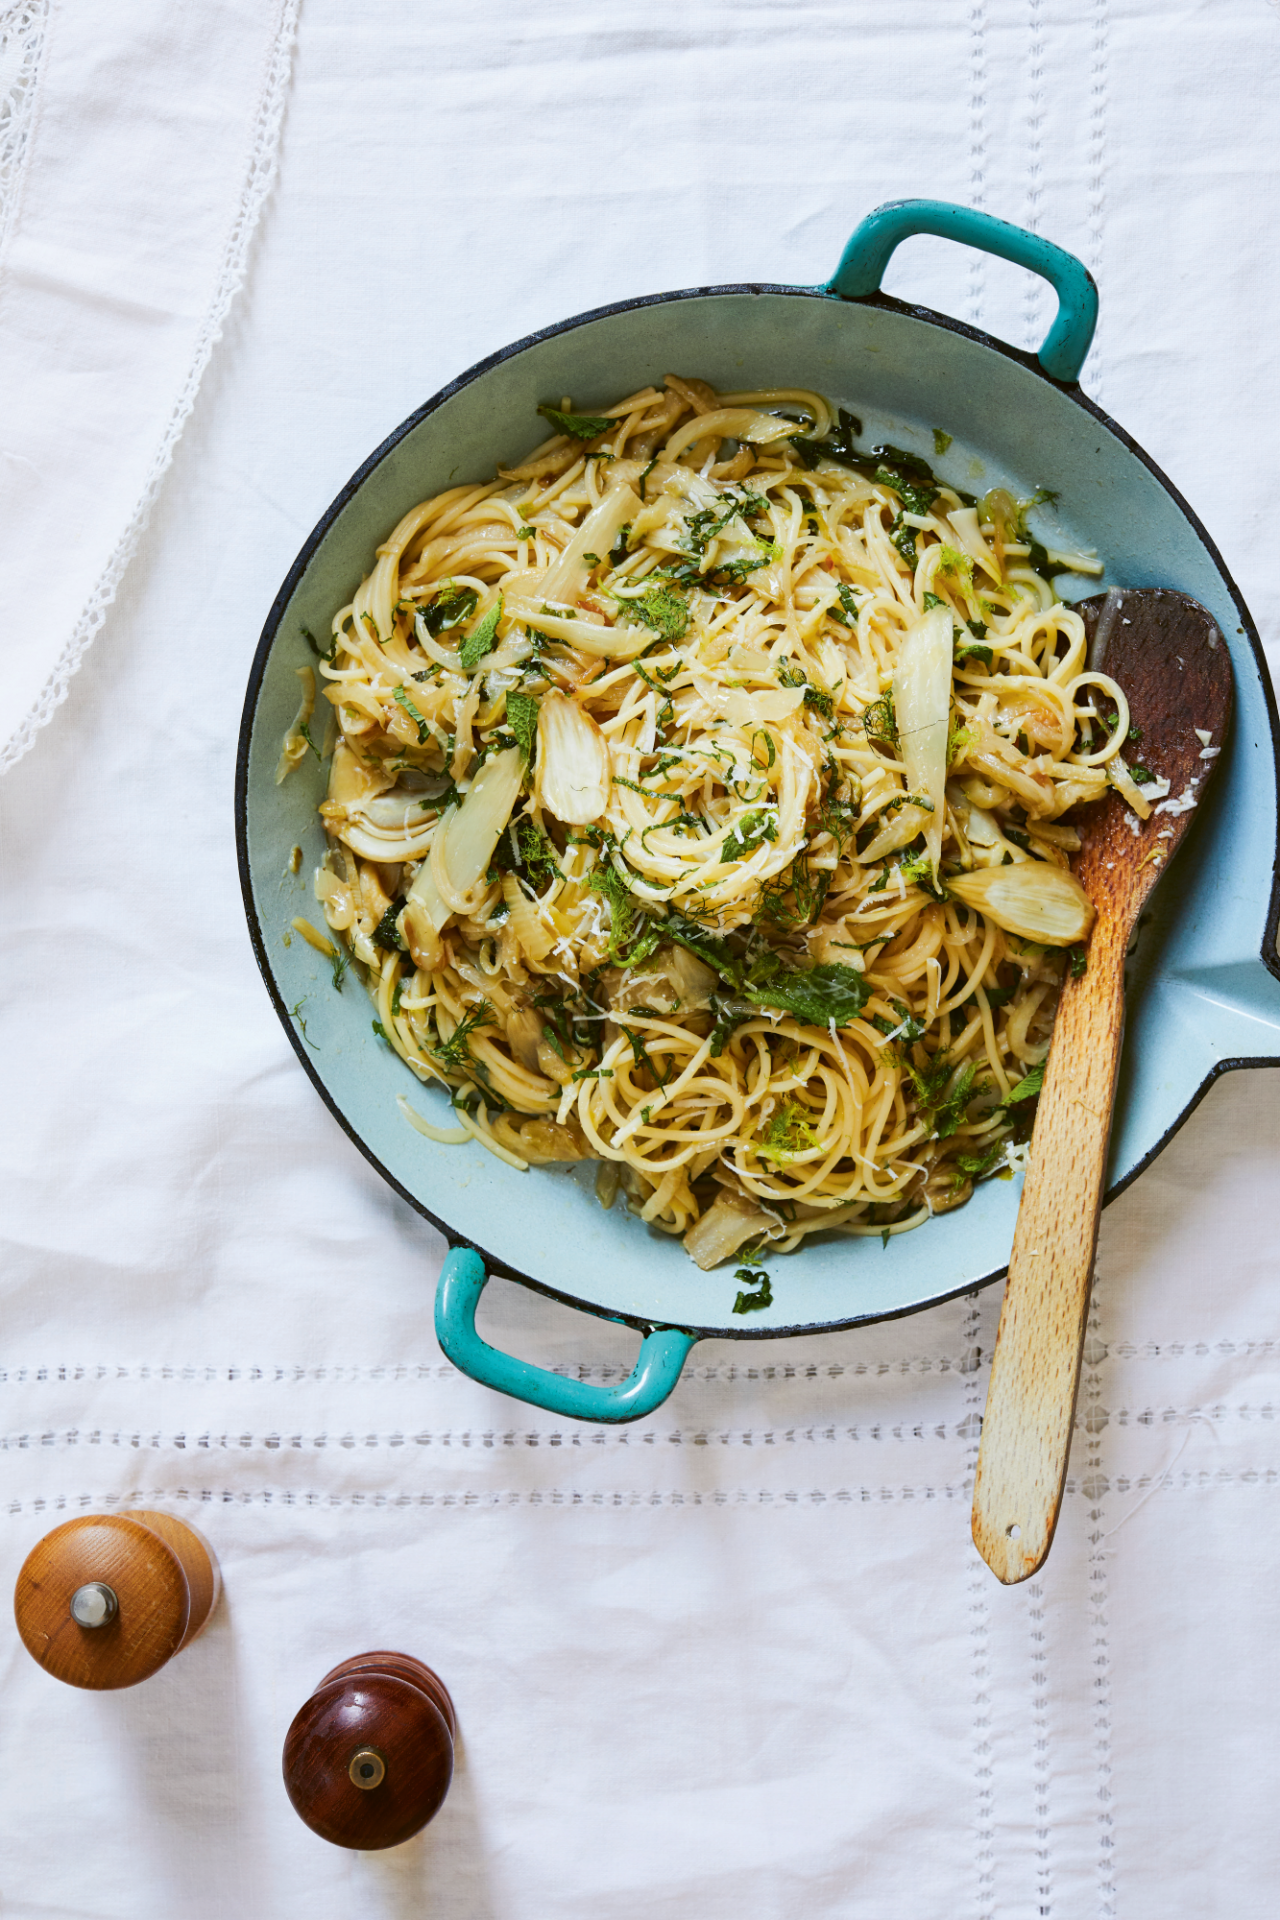 5 new ways with fennel – from fresh pasta to hearty stews